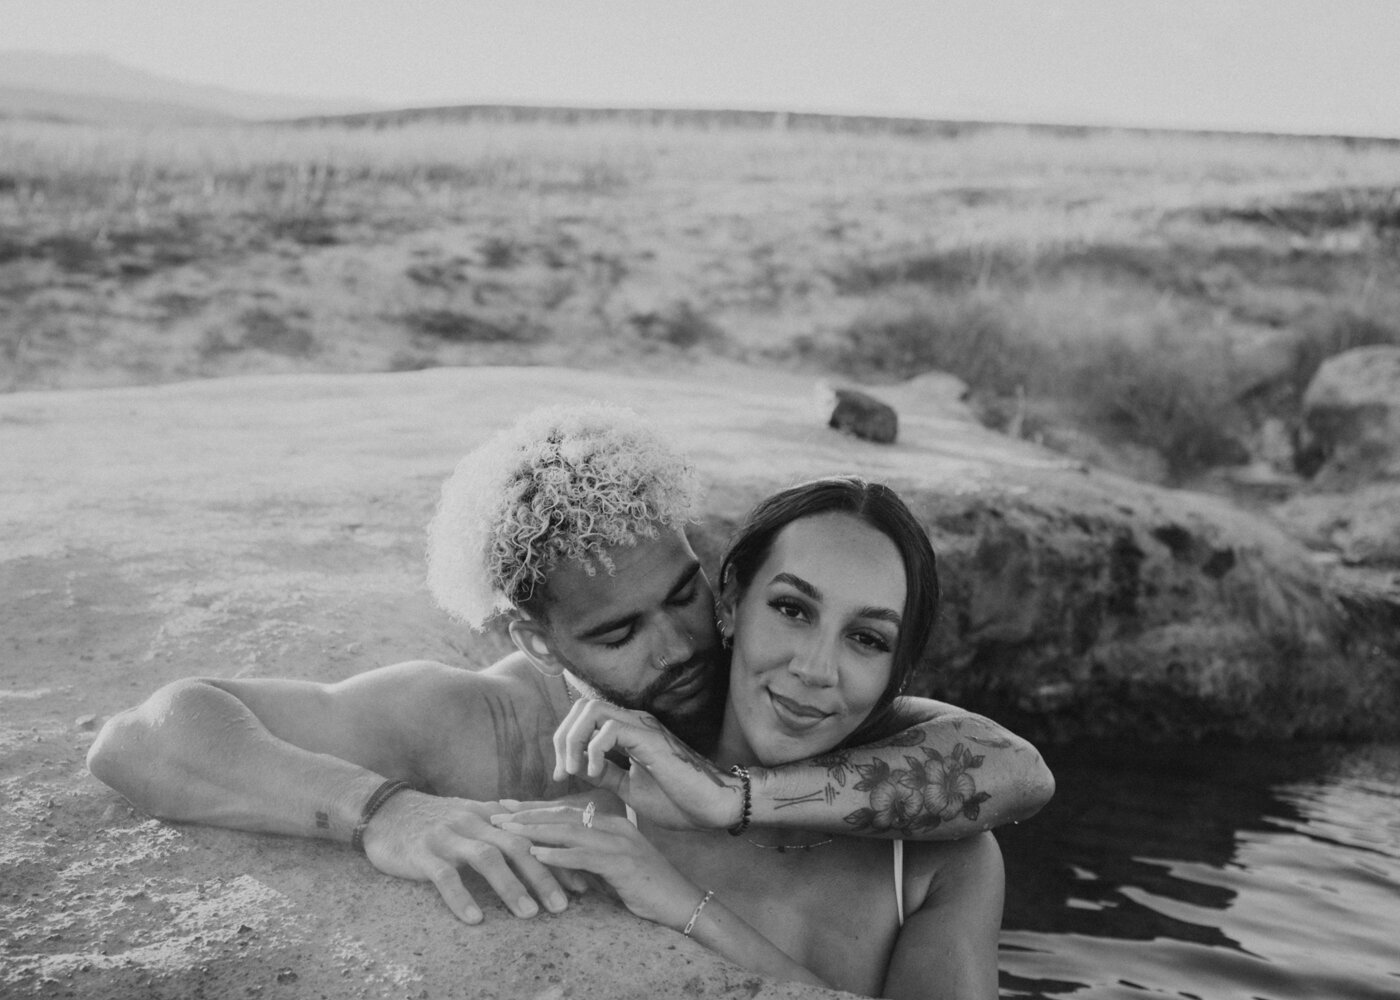 Hot Springs Engagement Session | Couples Photos at Mammoth Lakes, California | Sunrise at Wild Willy’s Hot Springs | Couple outfit inspo